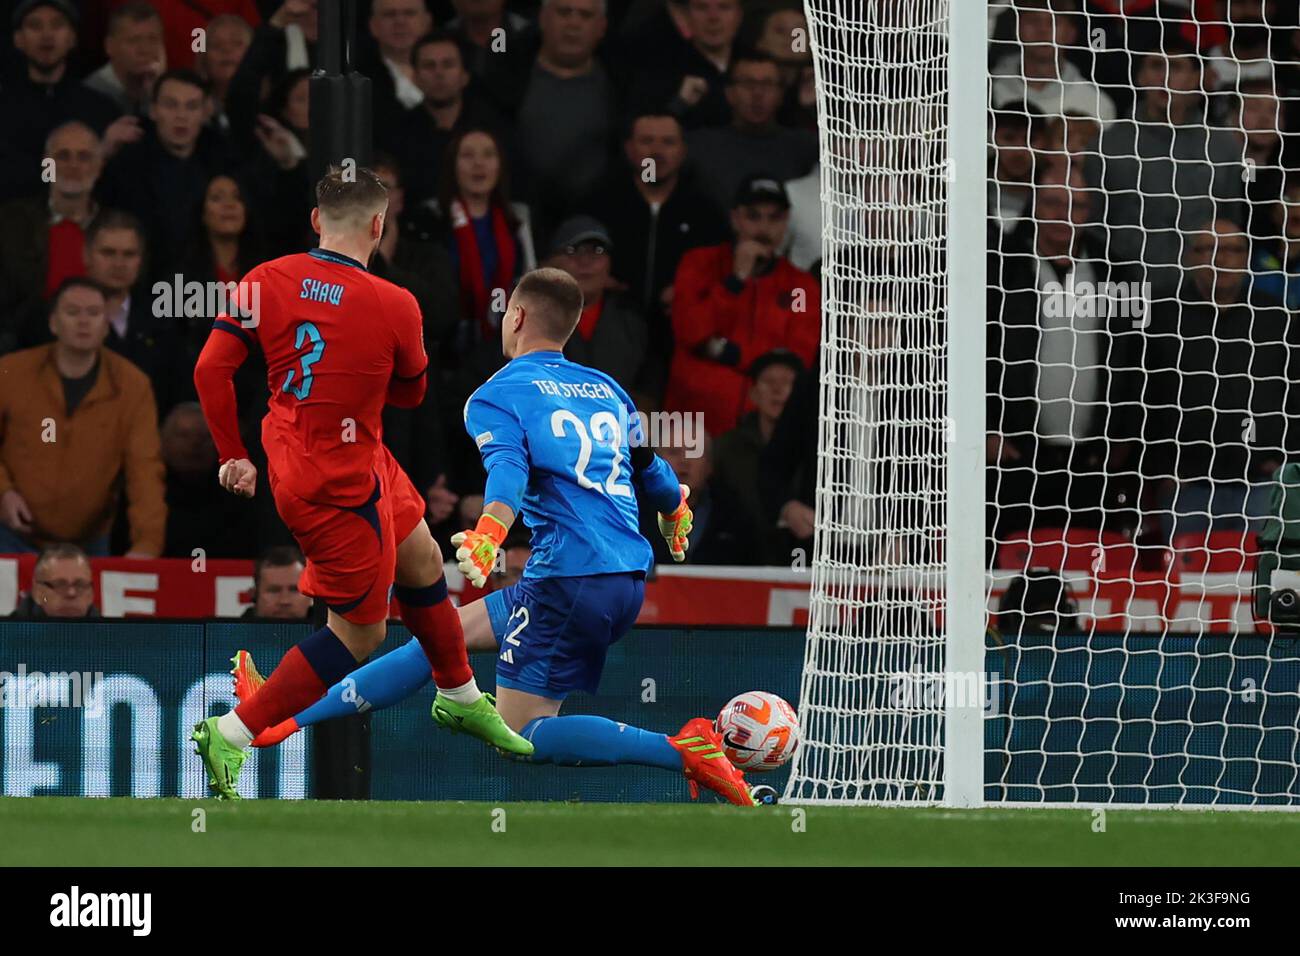 London, UK. 26th Sep, 2022. Soccer: Nations League A, England - Germany, Group Stage, Group 3, Matchday 6 at Wembley Stadium, England's Luke Shaw scores against Germany's goalkeeper Marc-Andre ter Stegen (r) to make it 1:2. Credit: Christian Charisius/dpa/Alamy Live News Stock Photo